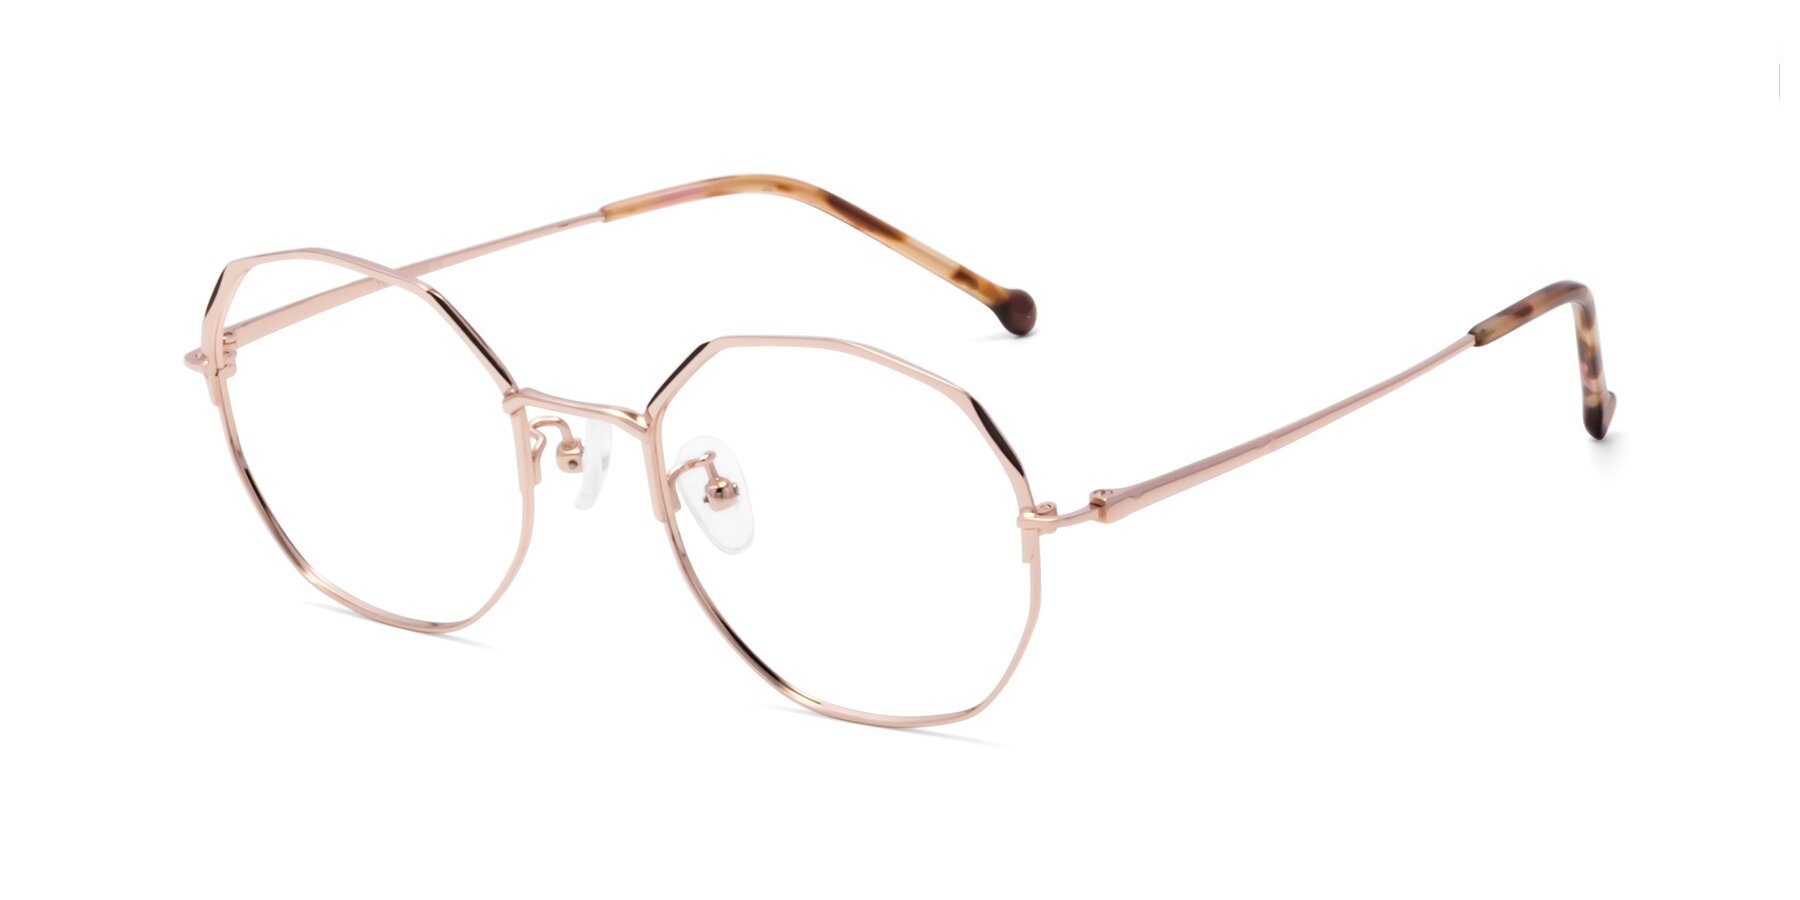 Angle of 18020 in Rose Gold with Clear Eyeglass Lenses